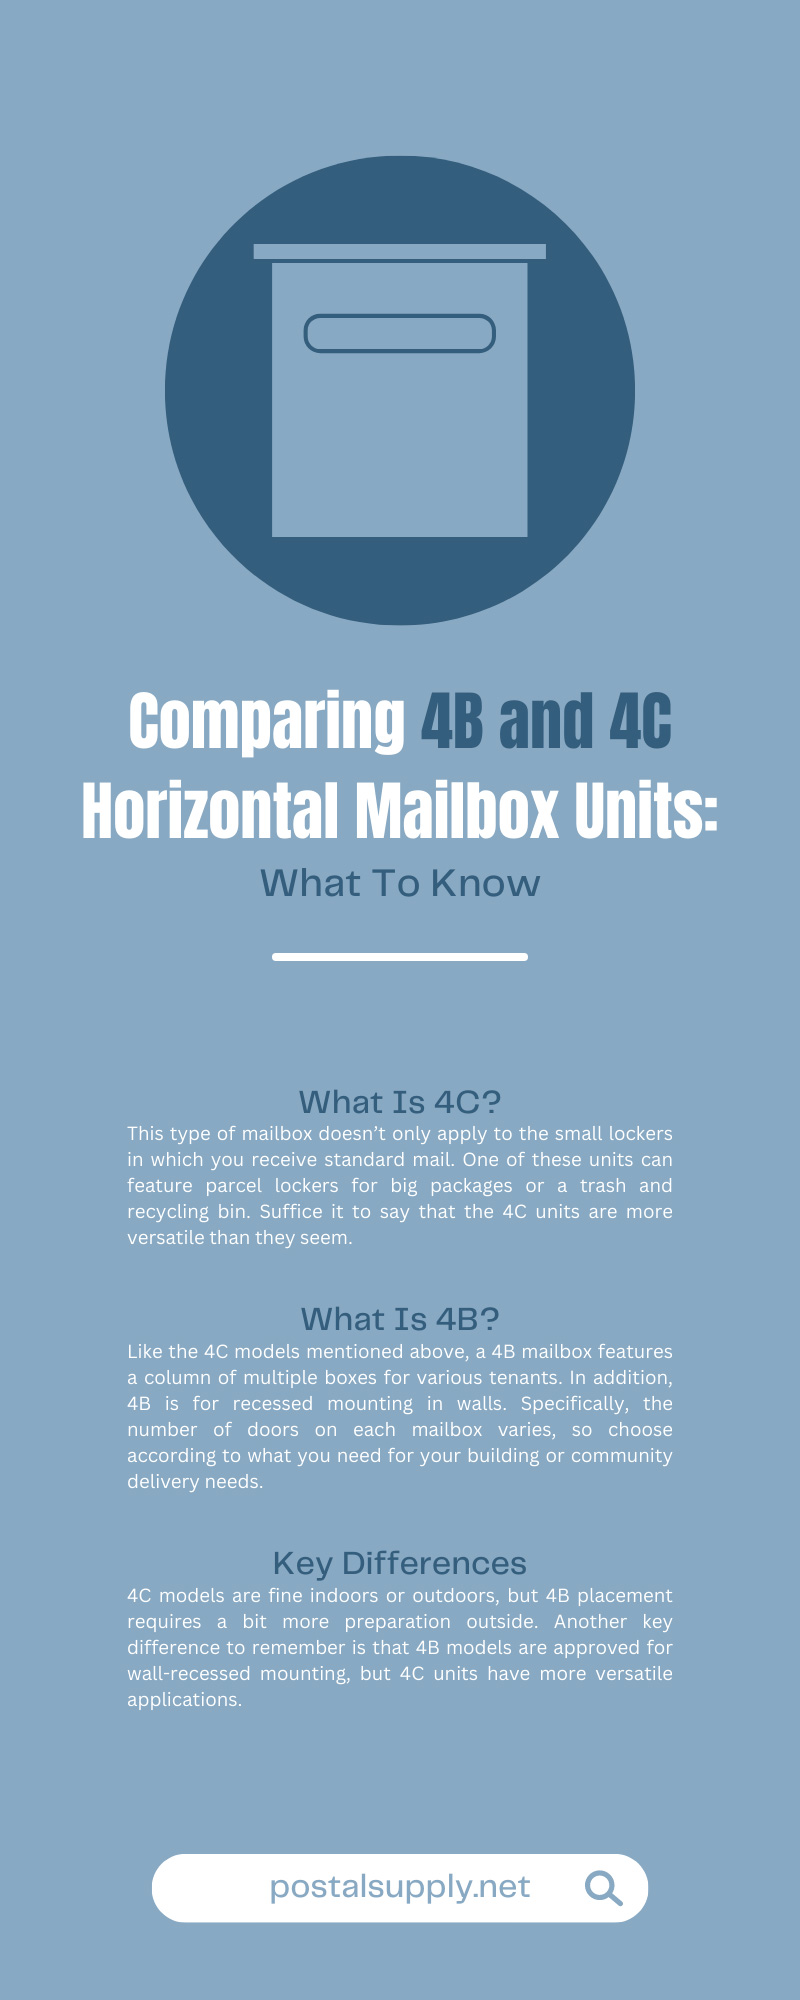 Comparing 4B and 4C Horizontal Mailbox Units: What To Know
